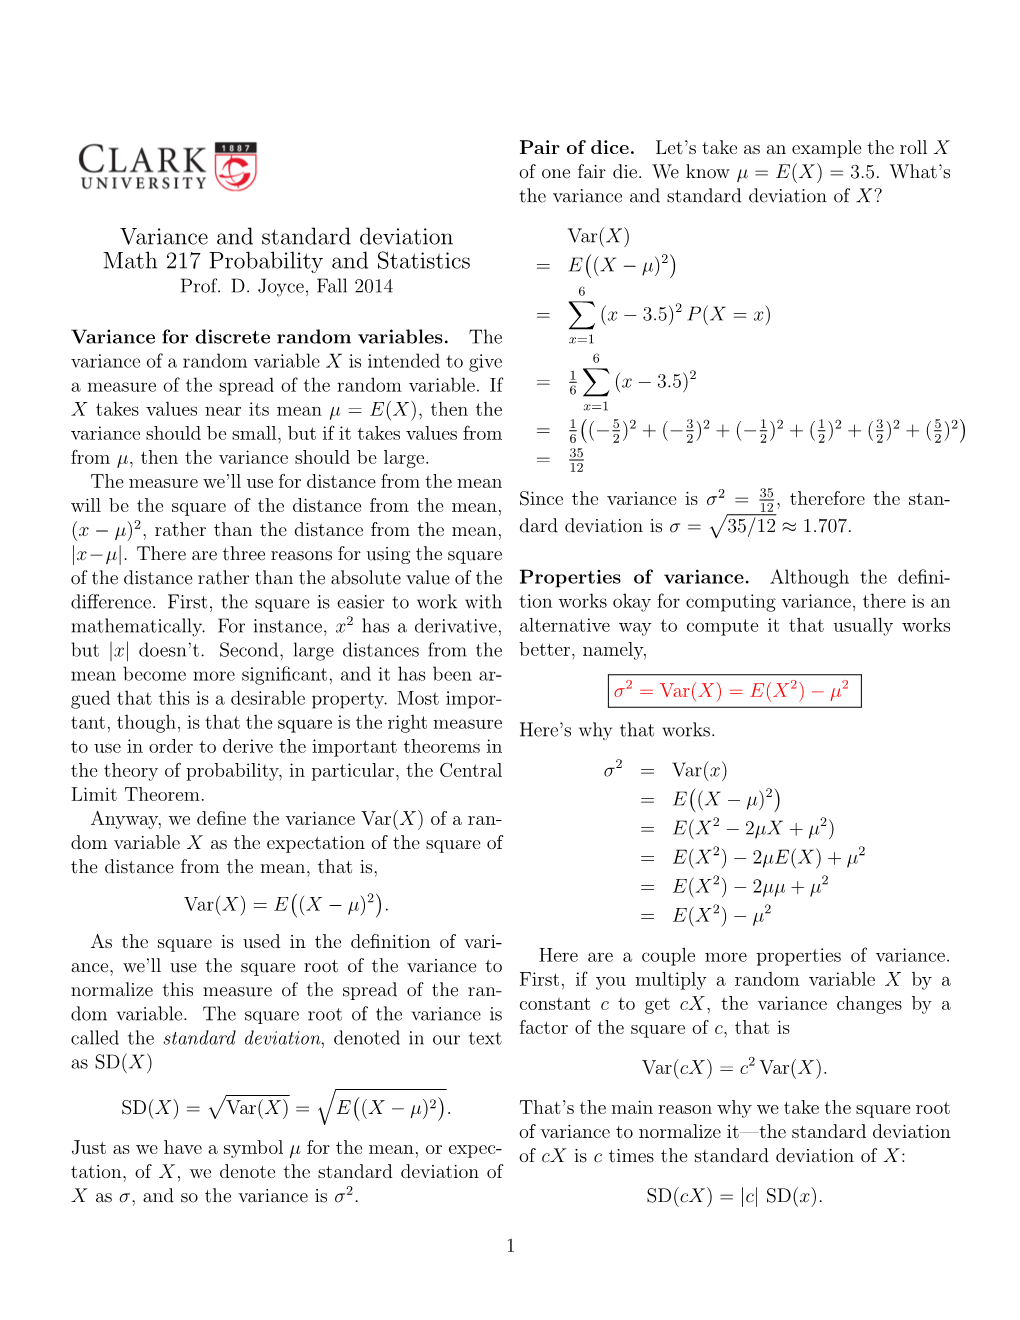 Variance and Standard Deviation Math 217 Probability and Statistics